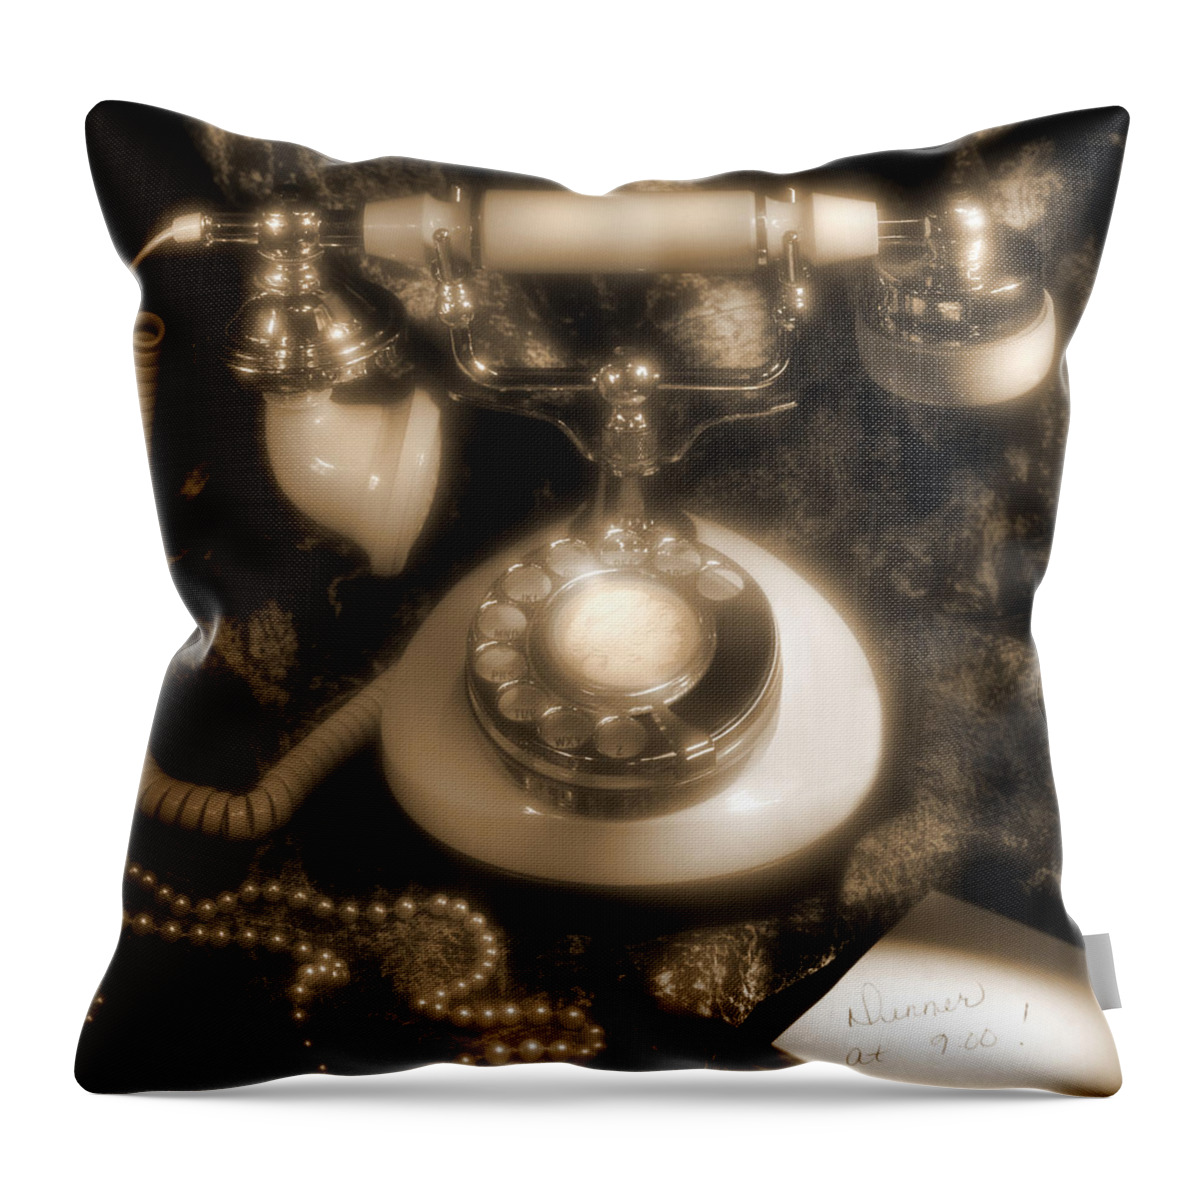 Vintage Look Throw Pillow featuring the photograph Princess Phone by Mike McGlothlen